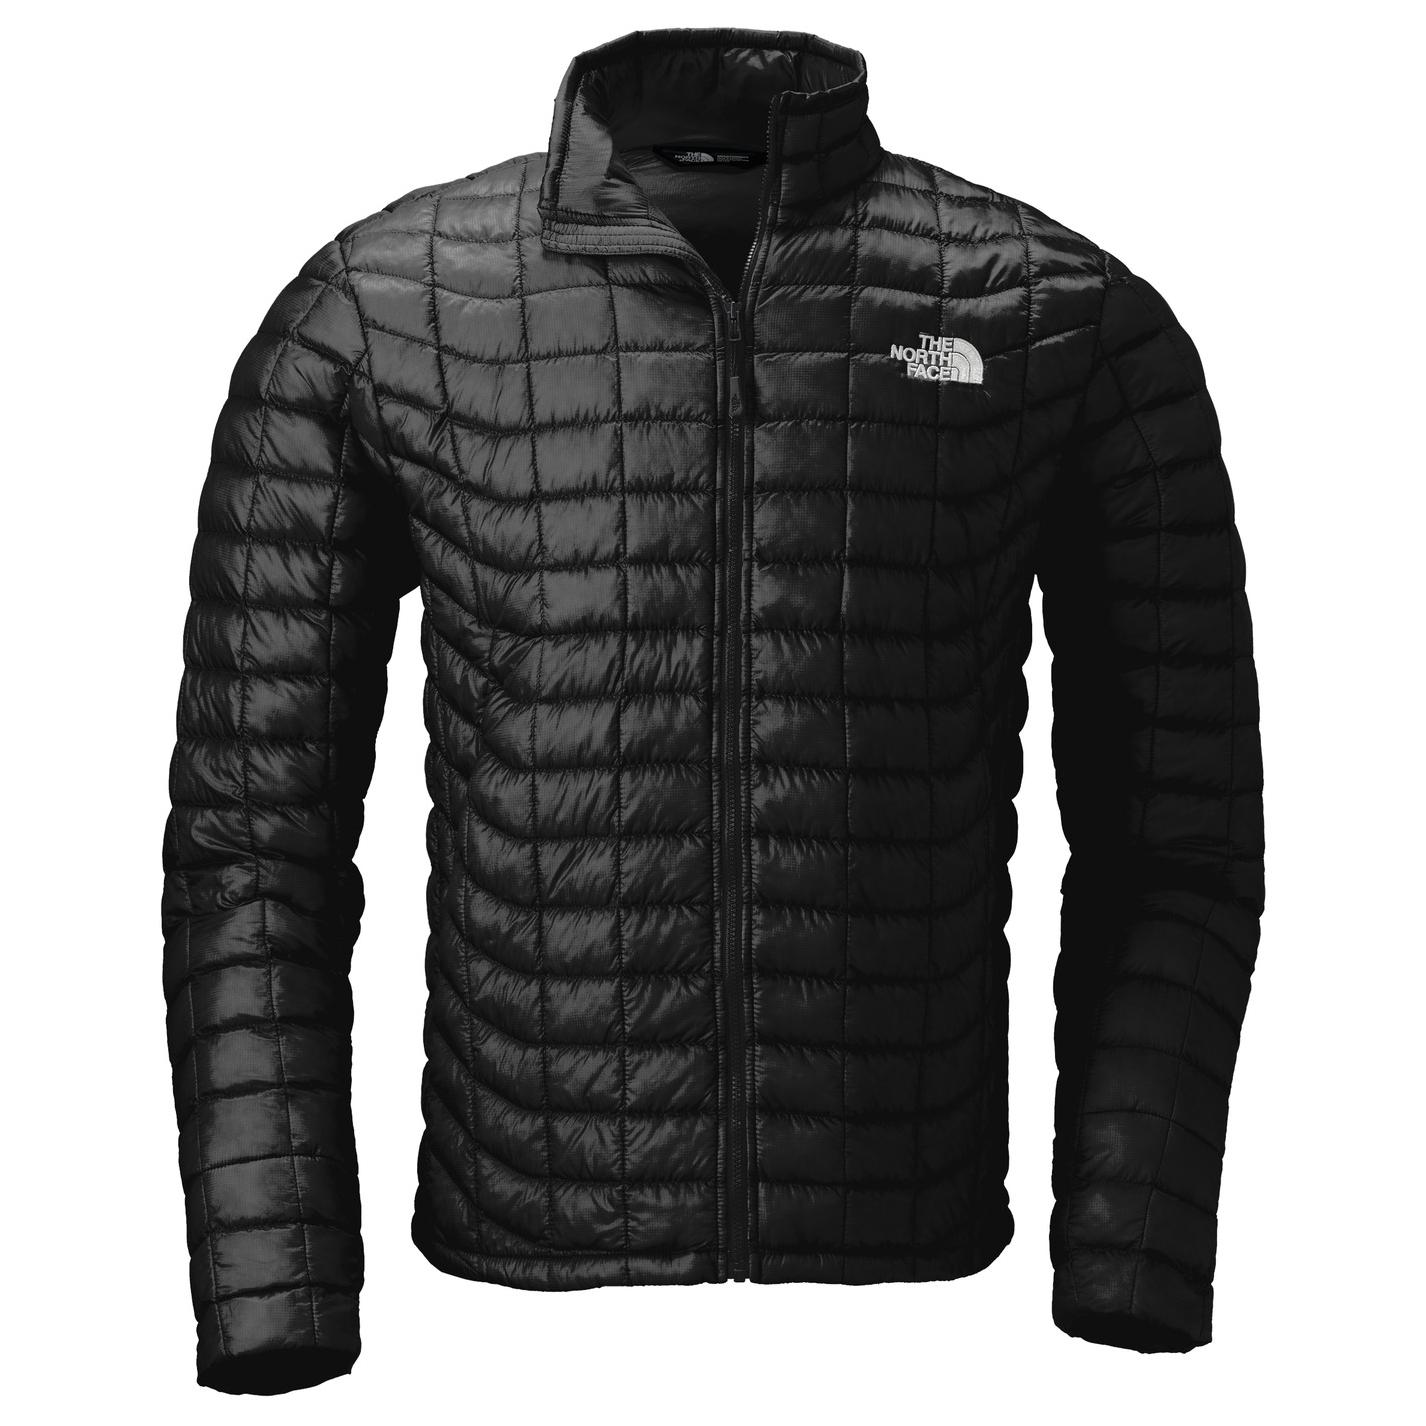 The North Face NF0A3LH2 ThermoBall Trekker Jacket - Black